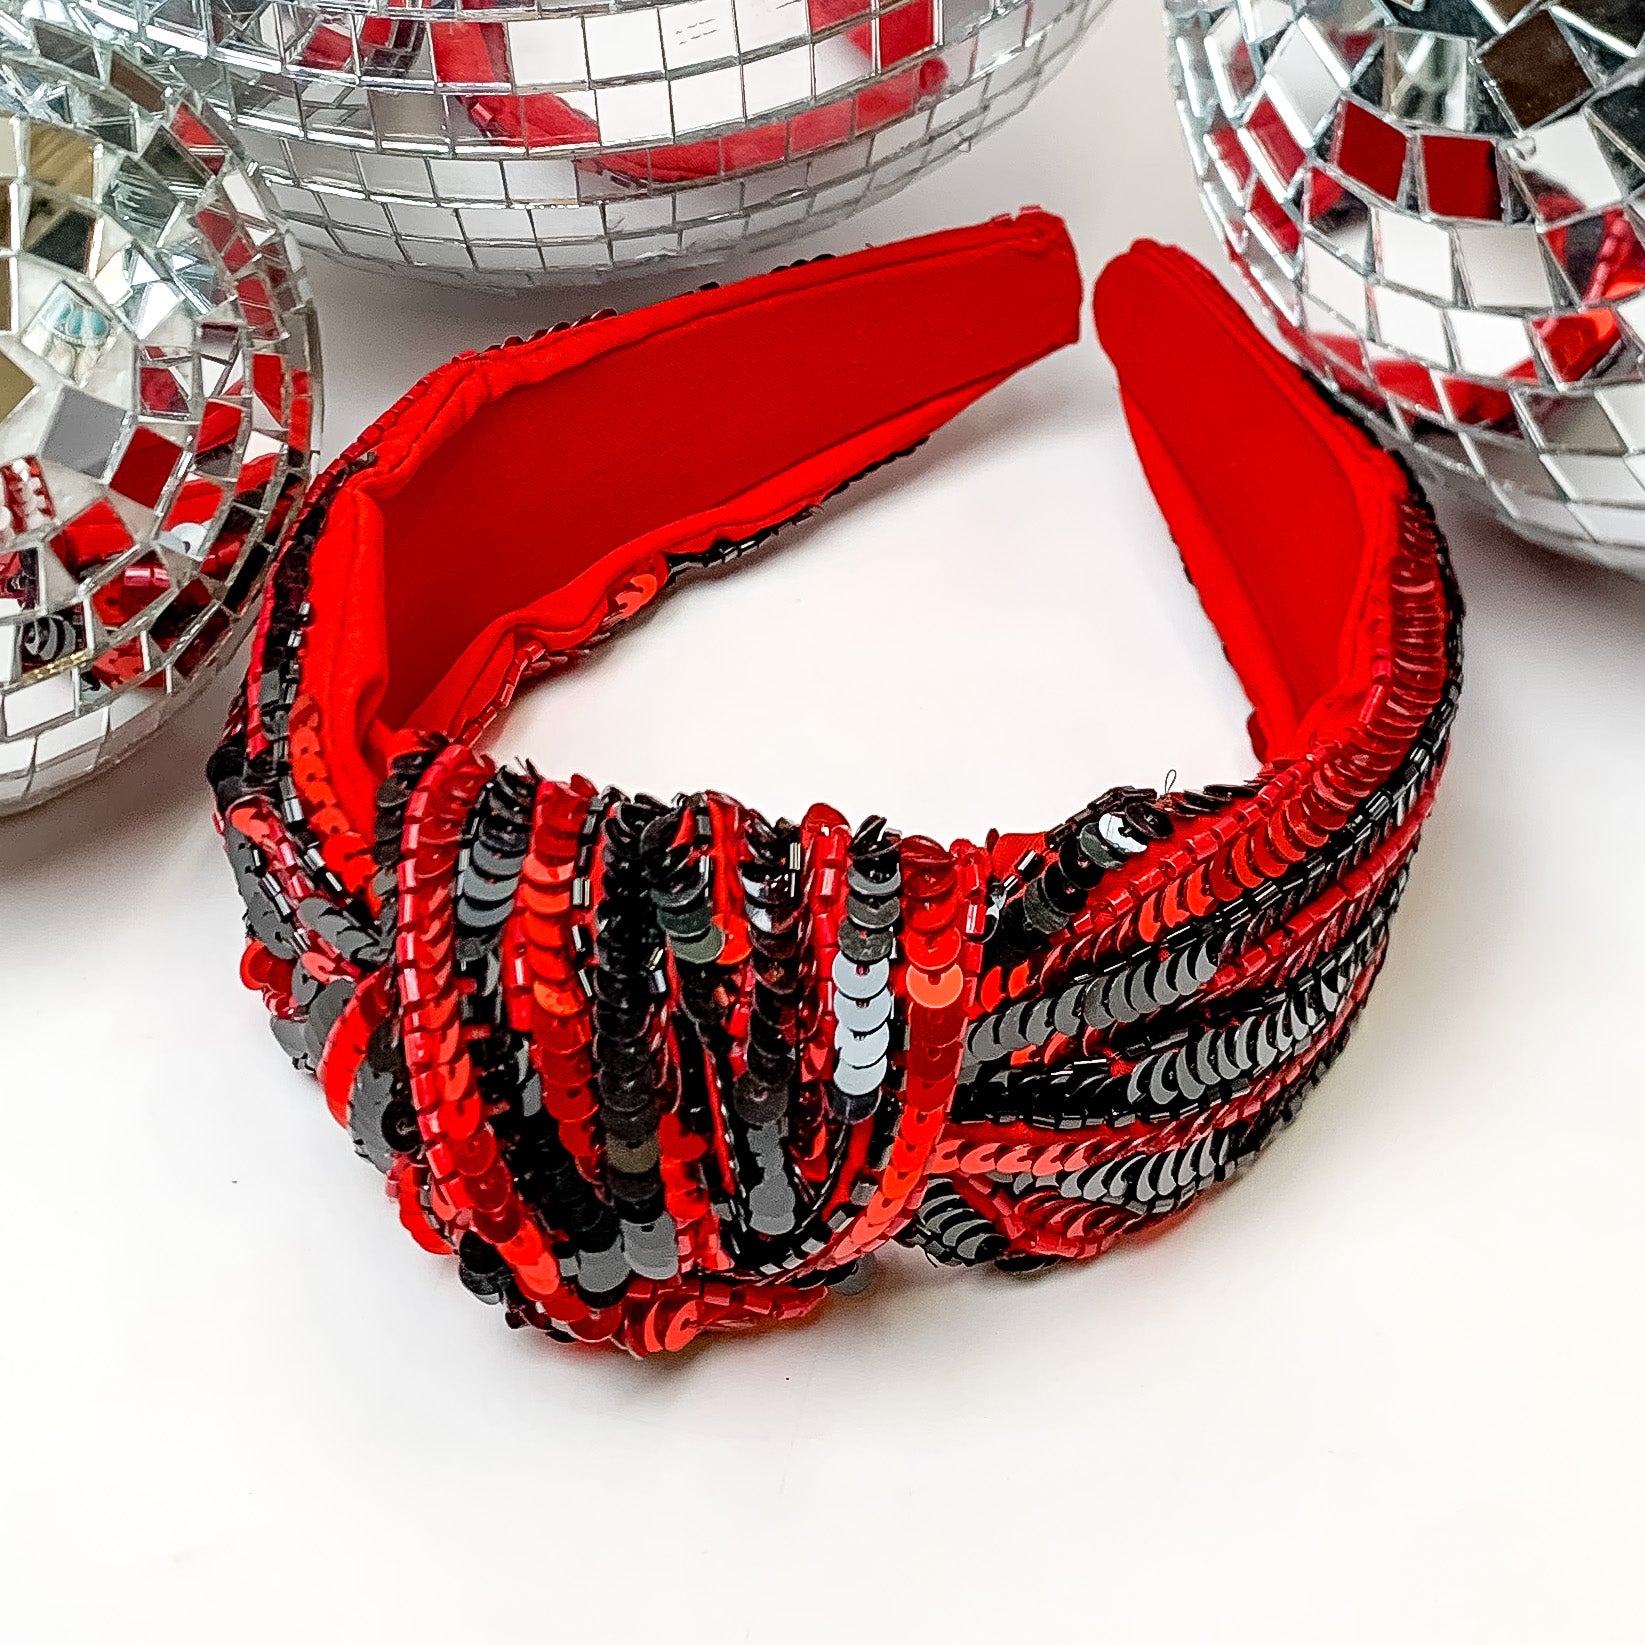 Striped Sequin Large Knot Headband in Red and Black. This headband is pictured on a white background with disco balls behind the headband.